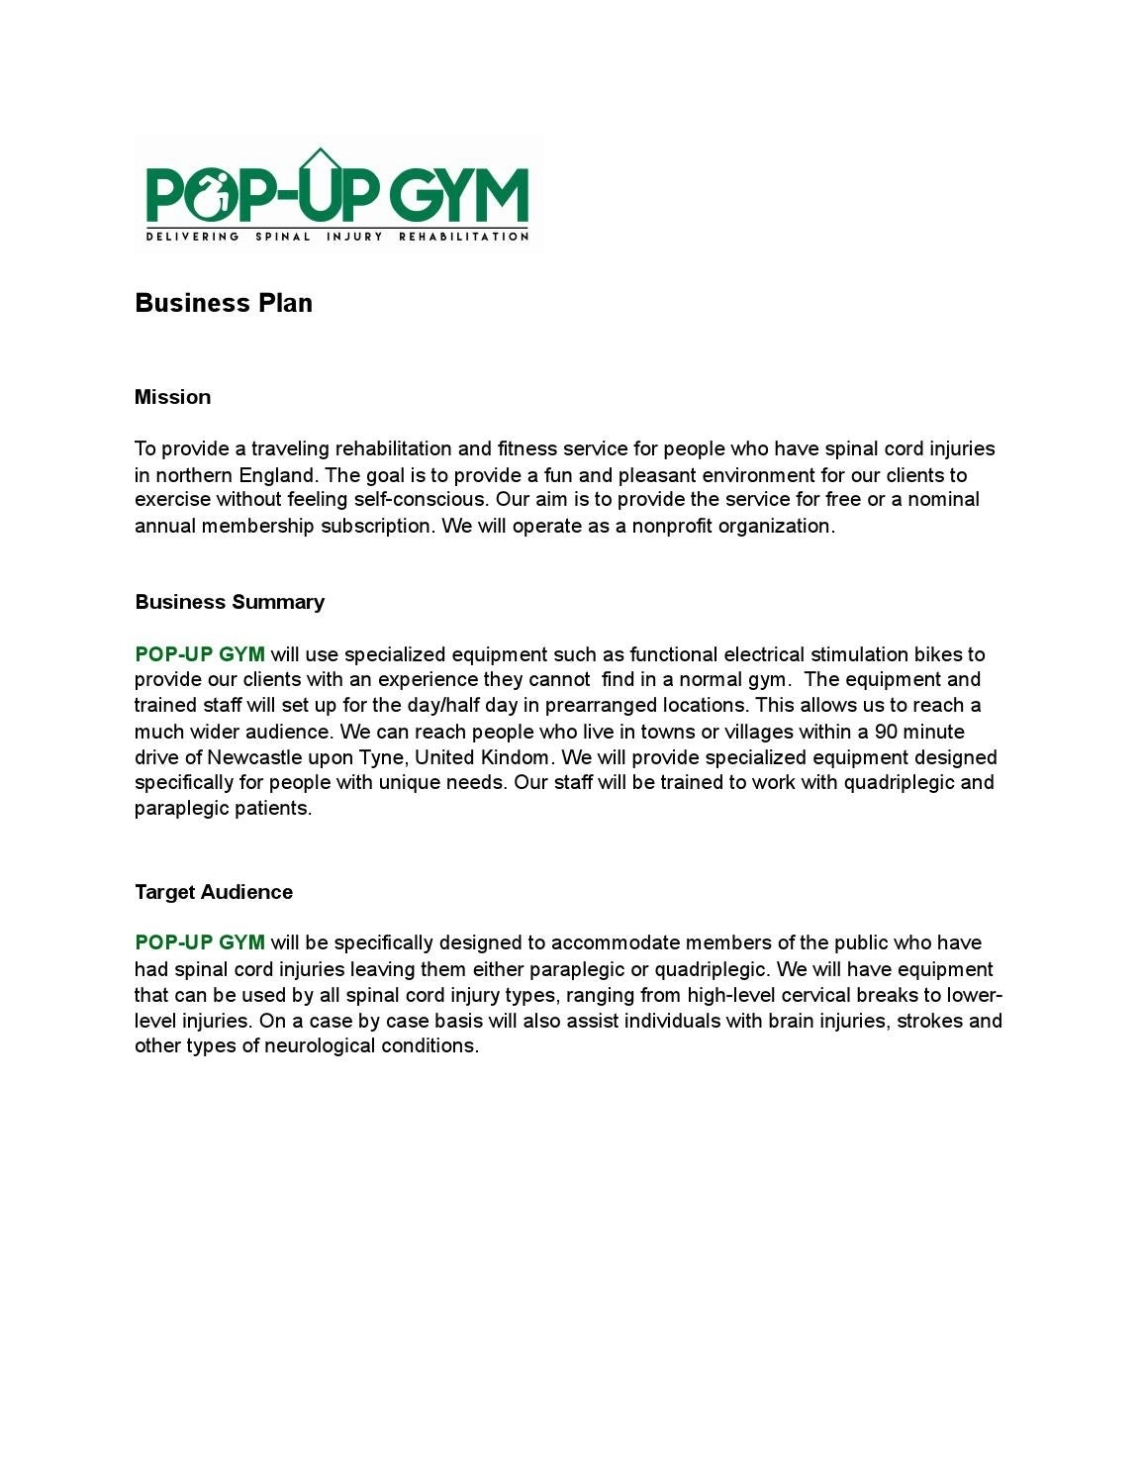 Pdf Pop Up Gym Business Plan By Scott Sayler - Issuu Pertaining To Business Plan Template For Gym